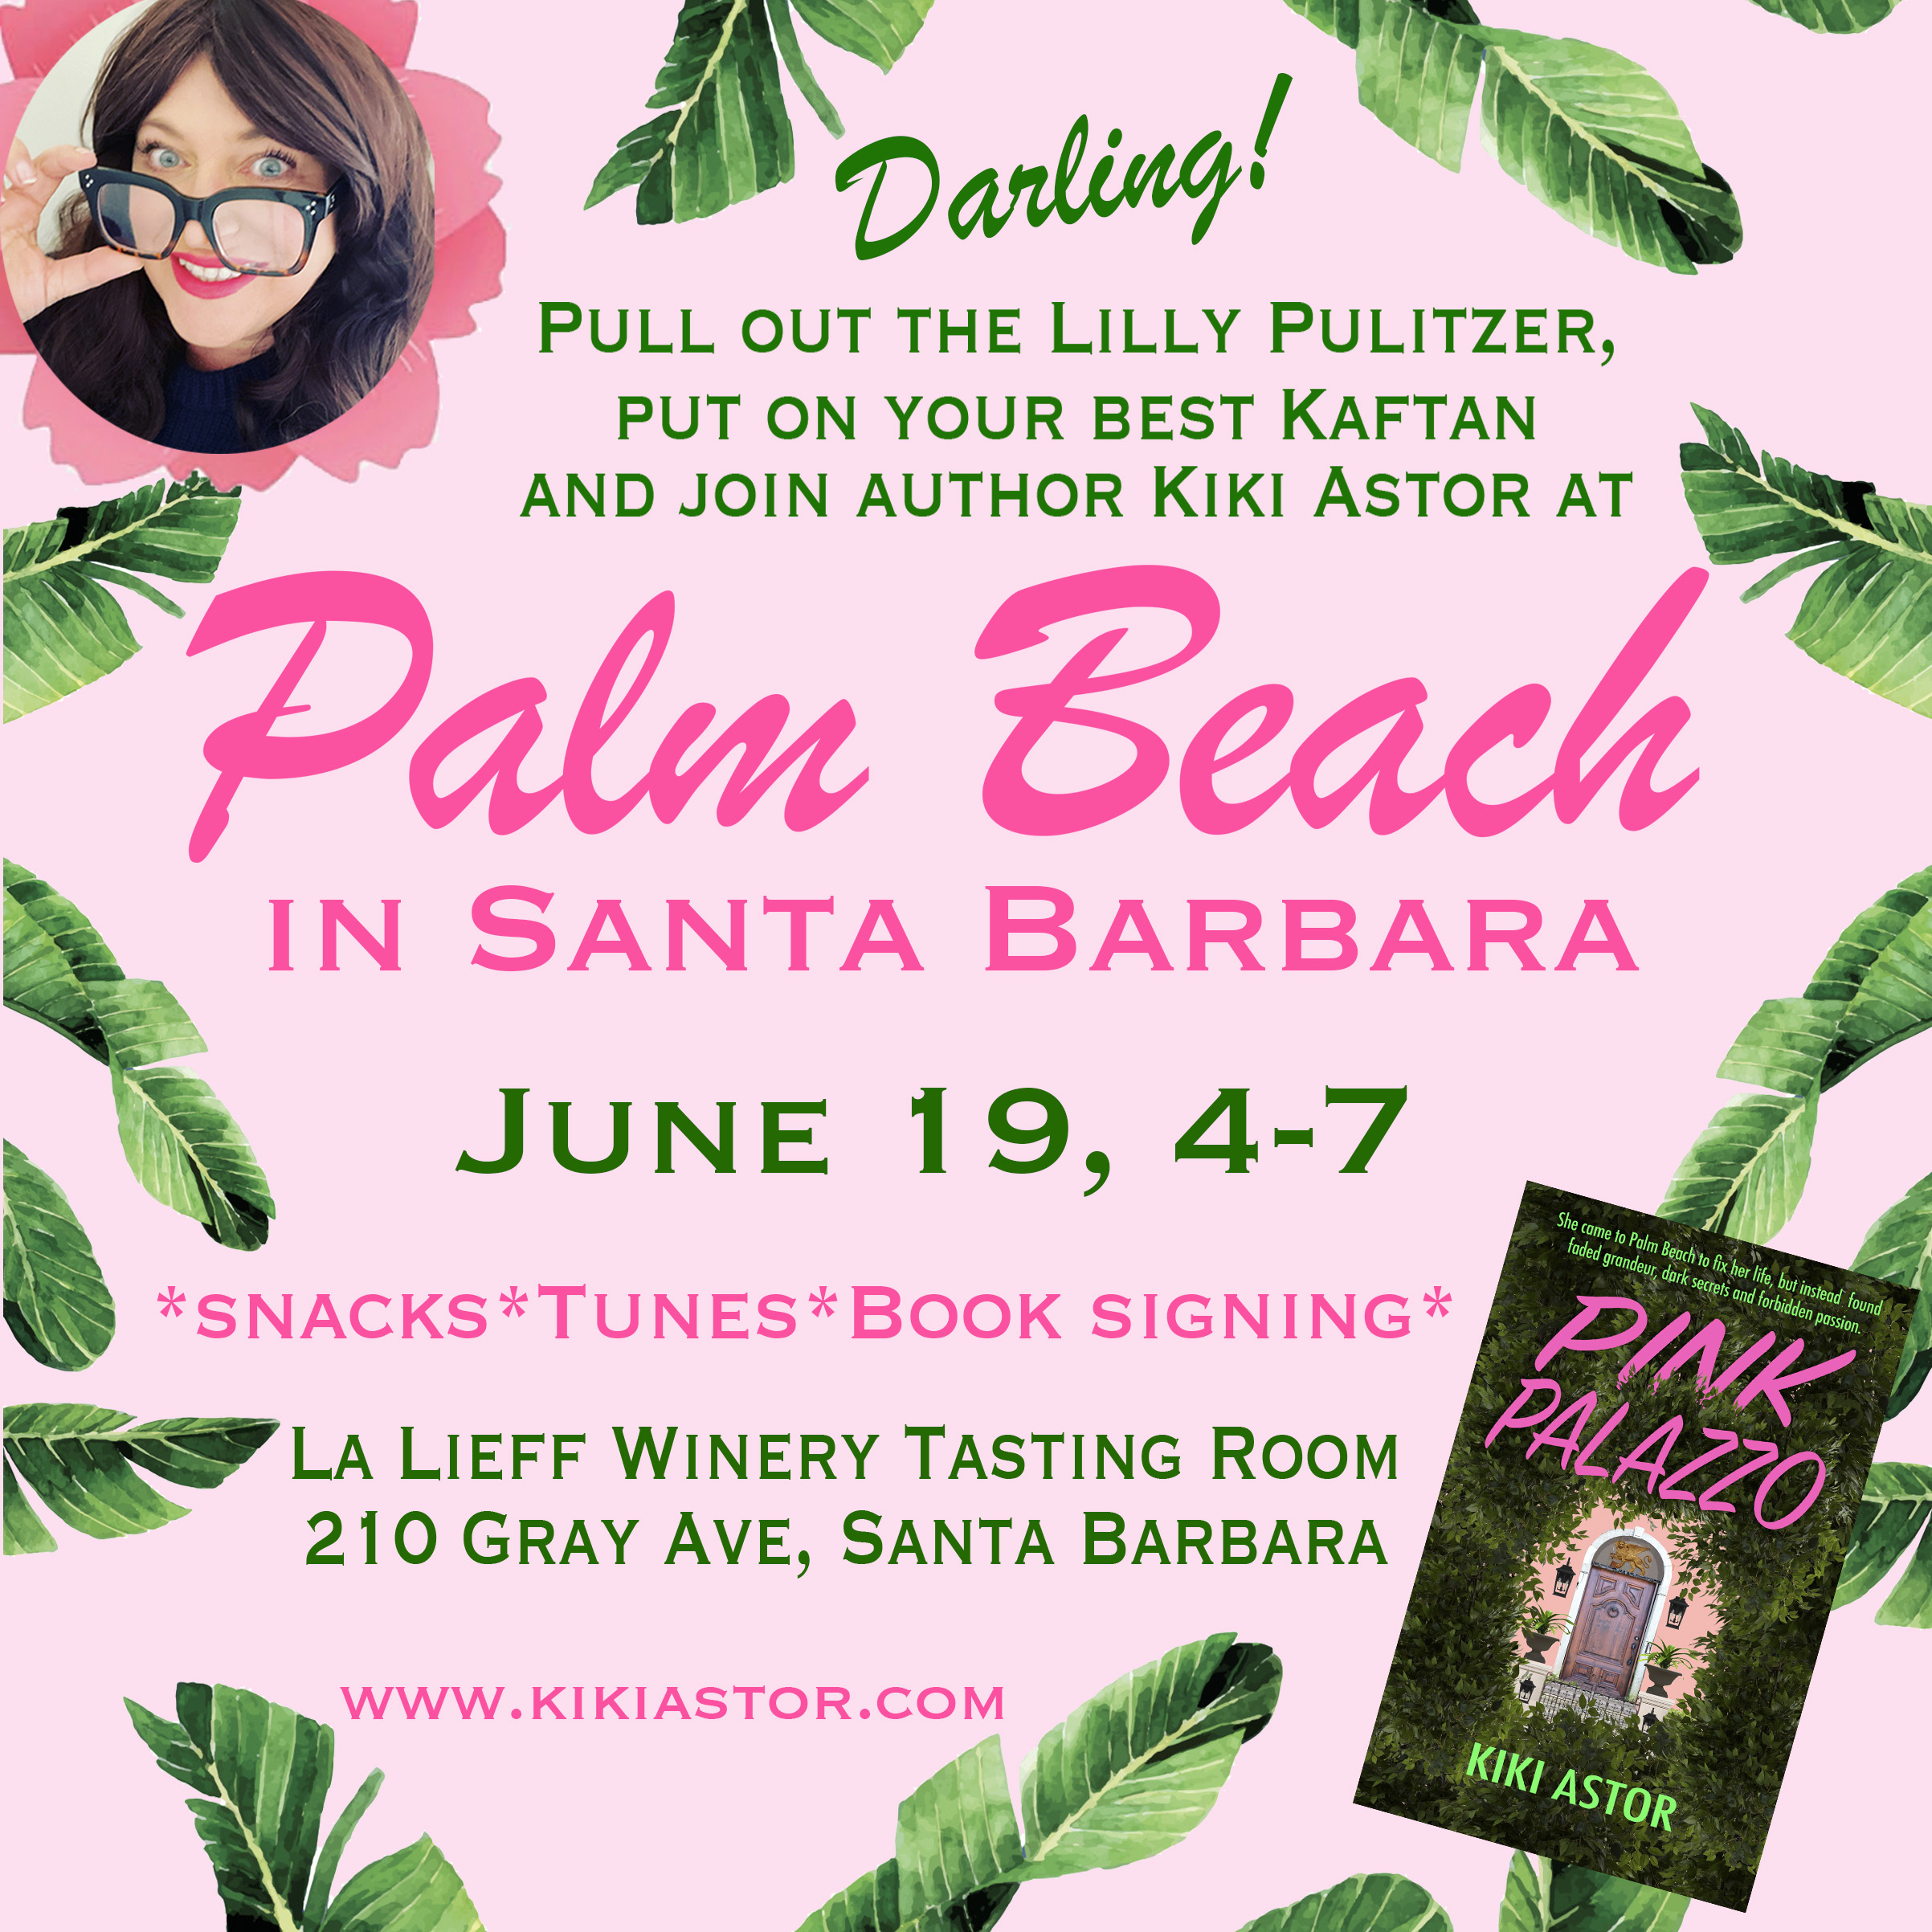 Kiki Astor Palm Beach party in Santa Barbara at La Lieff Winery on June 19, 2024, 4-7pm. Snacks, tunes, book signings with your favorite internet auntie and romance author, Kiki Astor